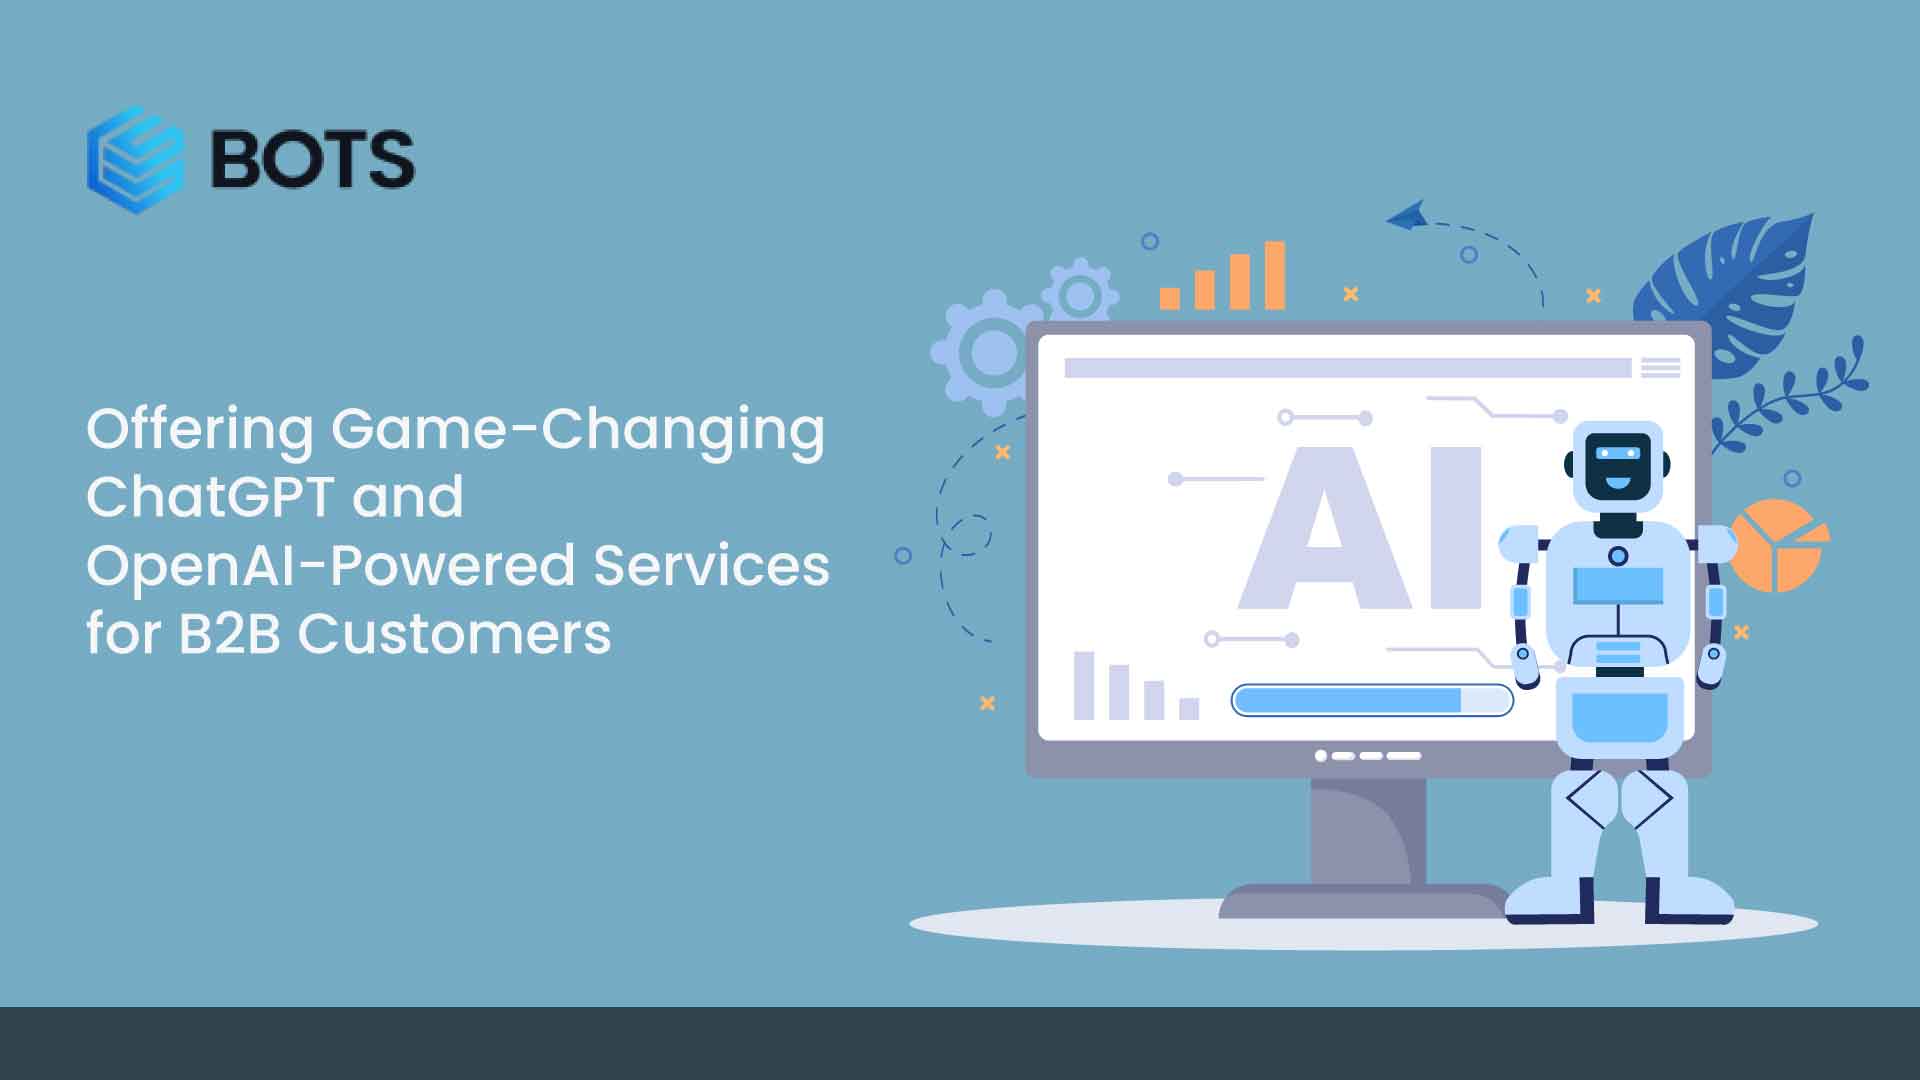 BOTS, Inc. is Offering Game-Changing ChatGPT and OpenAI-Powered Services for B2B Customers